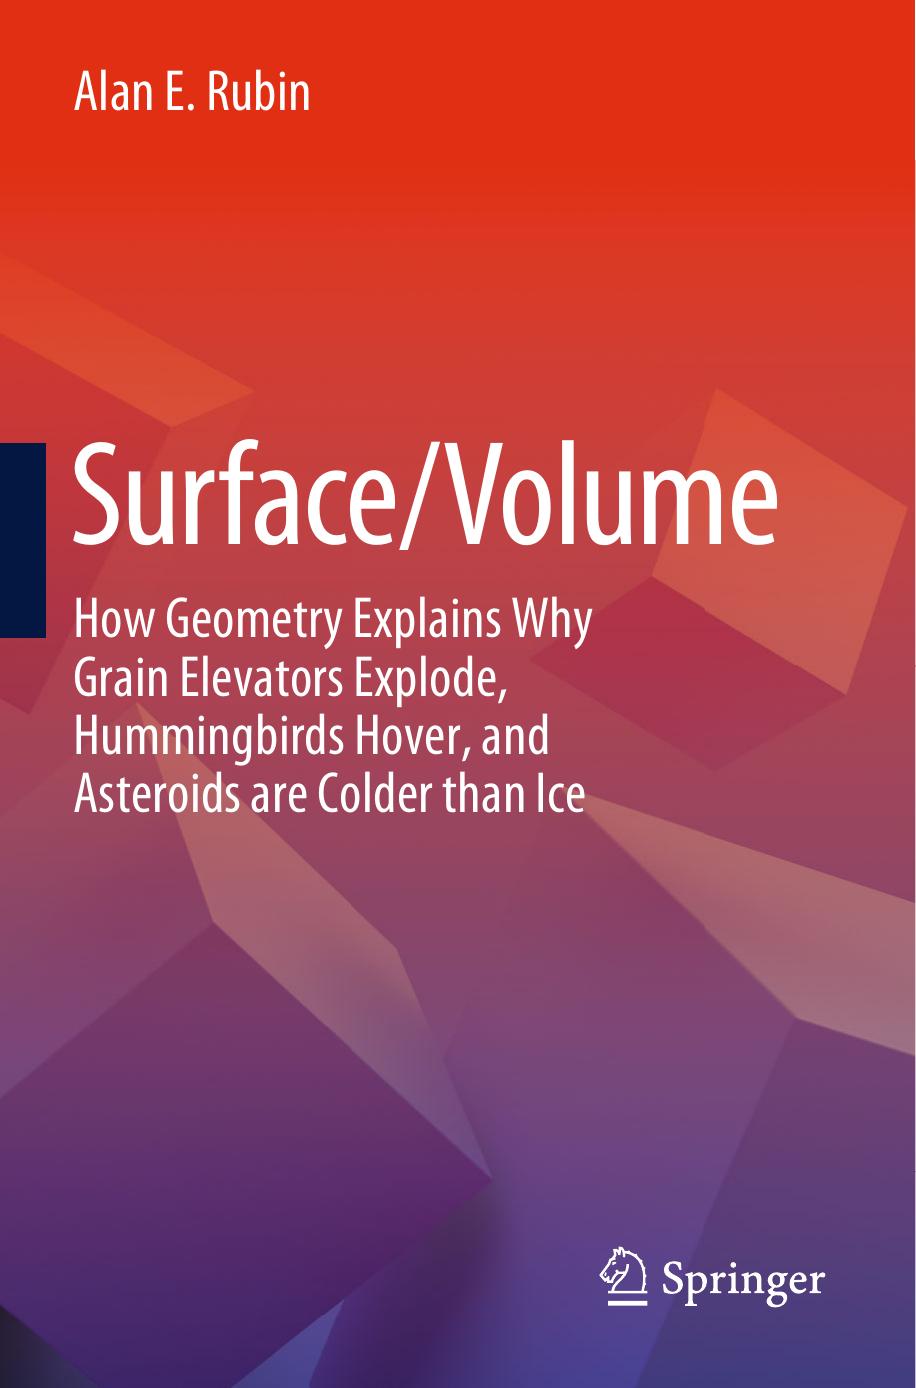 Surface/Volume: How Geometry Explains Why Grain Elevators Explode, Hummingbirds Hover, and Asteroids are Colder than Ice by Alan E. Rubin